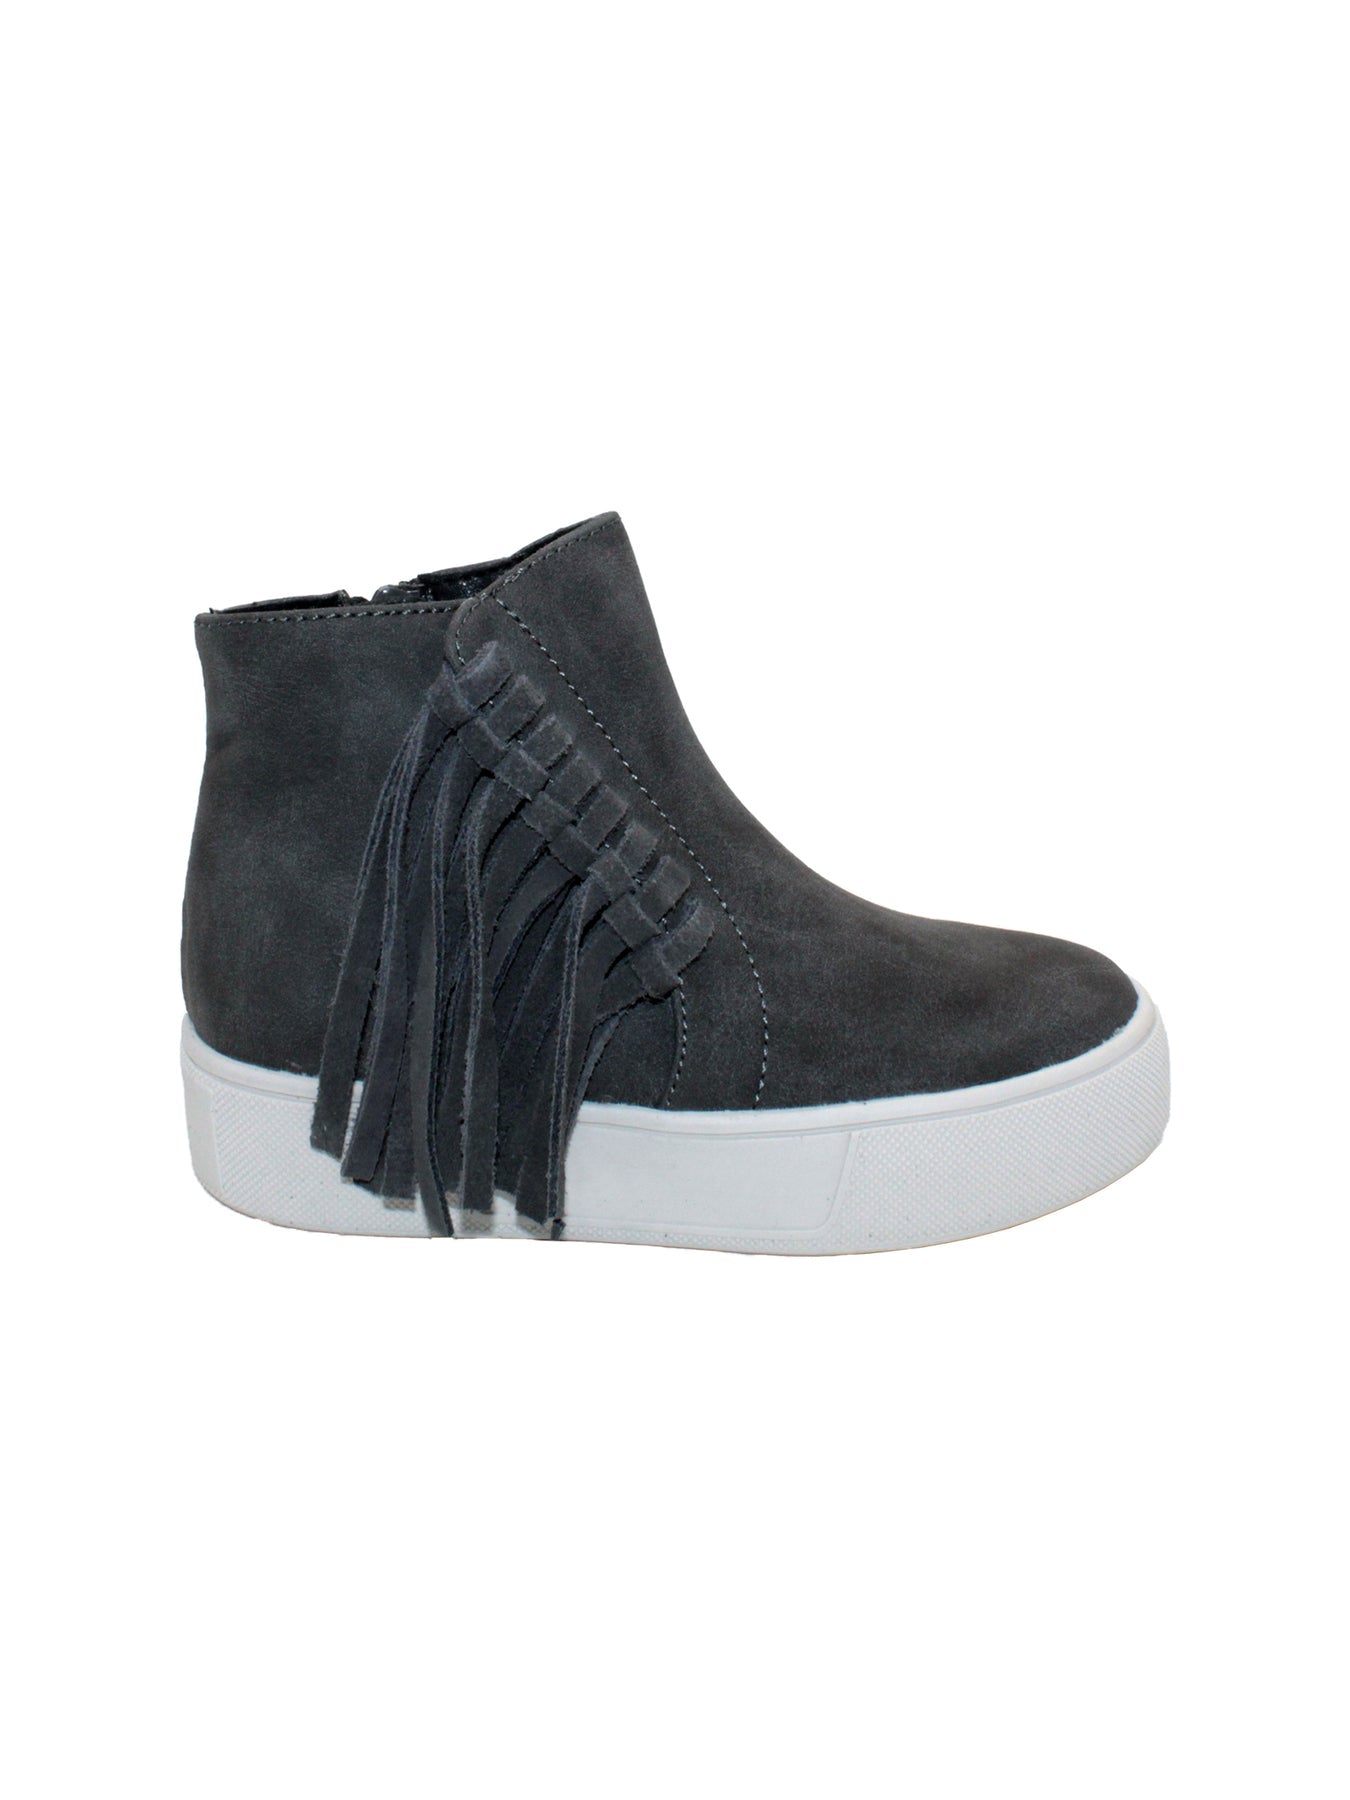 The ‘Lance’ fringed sneaker bootie by Volatile Kids is designed for little feet going to big places and is the comfiest way to take part in the Western trend. They have inside zippers to make them easy to slip on and off, while the textured rubber sneaker bottom provides traction and stability. These work equally well with skirts and pants alike.